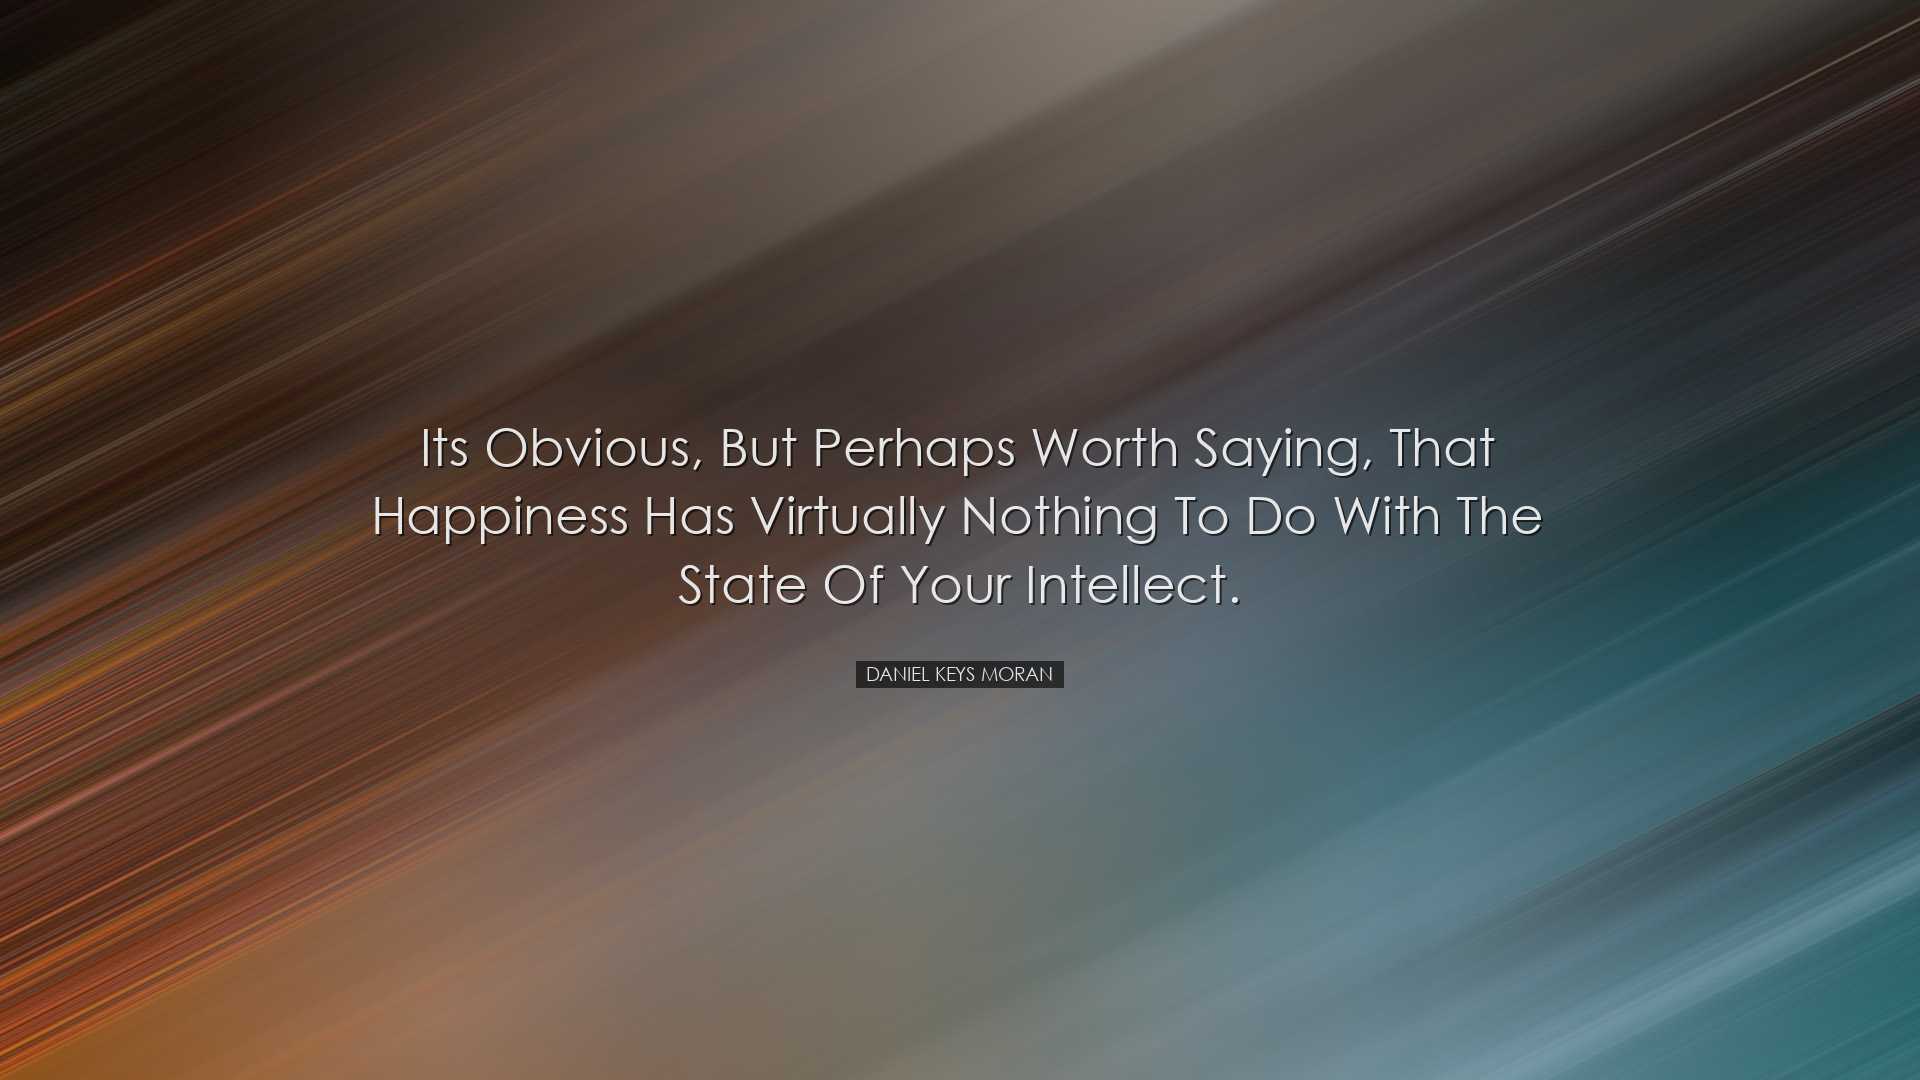 Its obvious, but perhaps worth saying, that happiness has virtuall